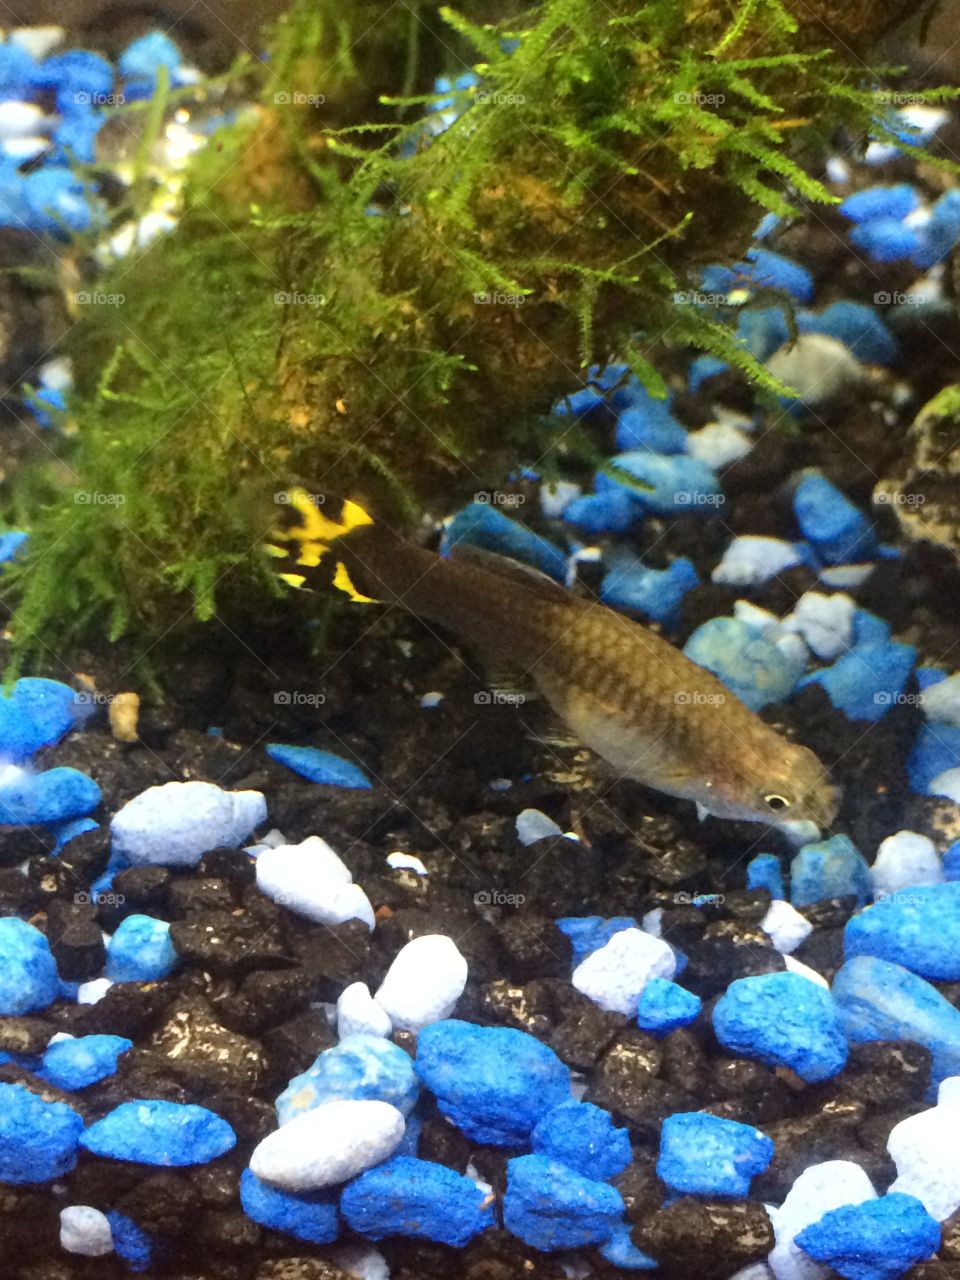 Black and yellow female guppy against blue and black rocks